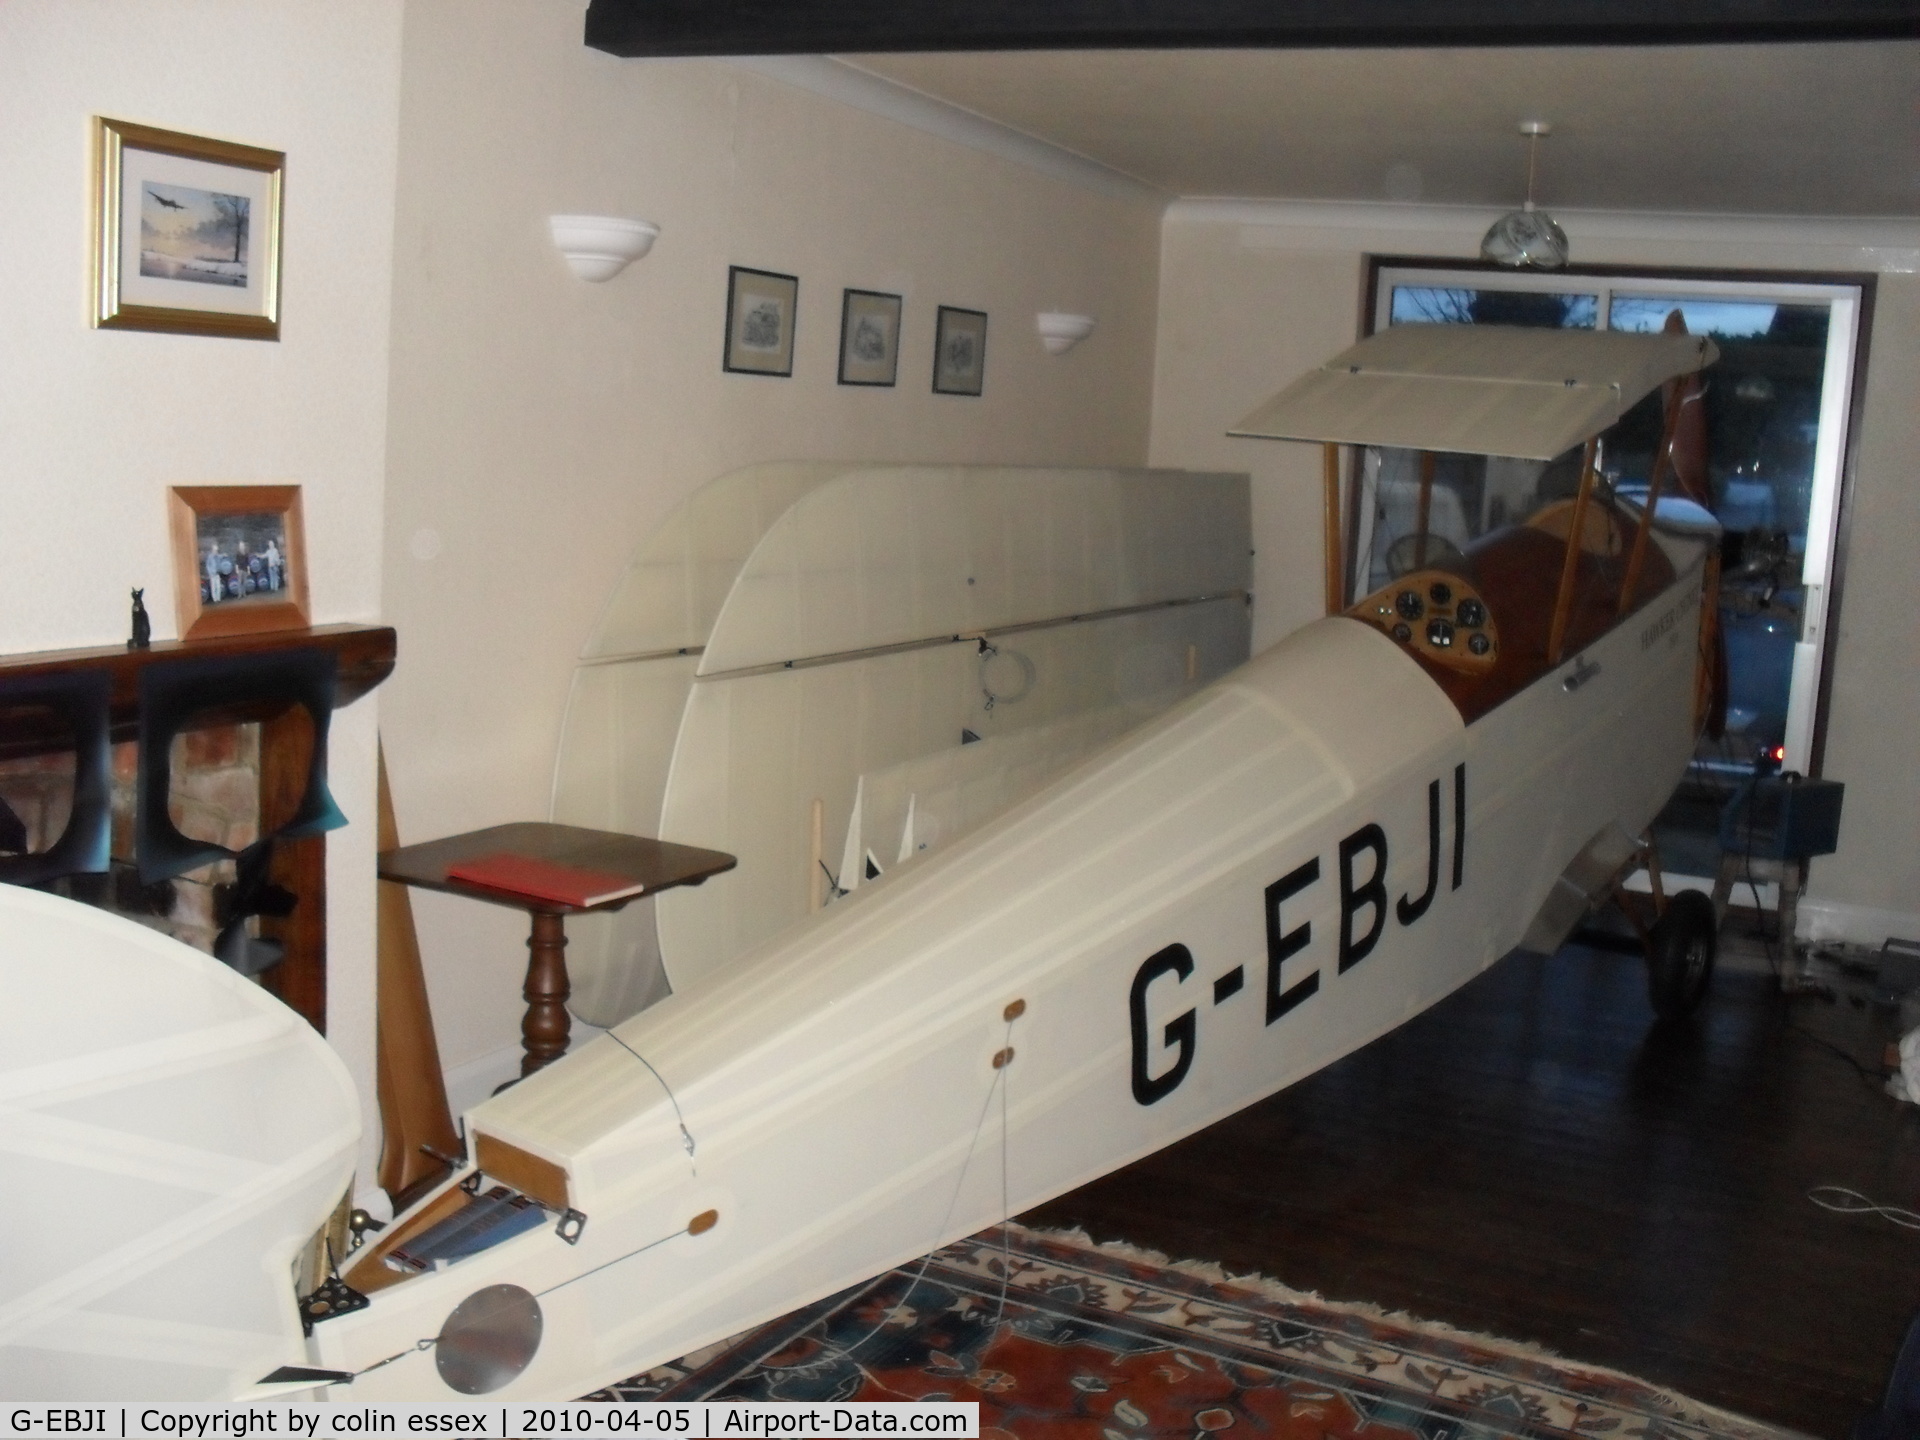 G-EBJI, 1977 Hawker Cygnet Replica C/N PFA 077-10240, at home awaiting removal to Old Warden